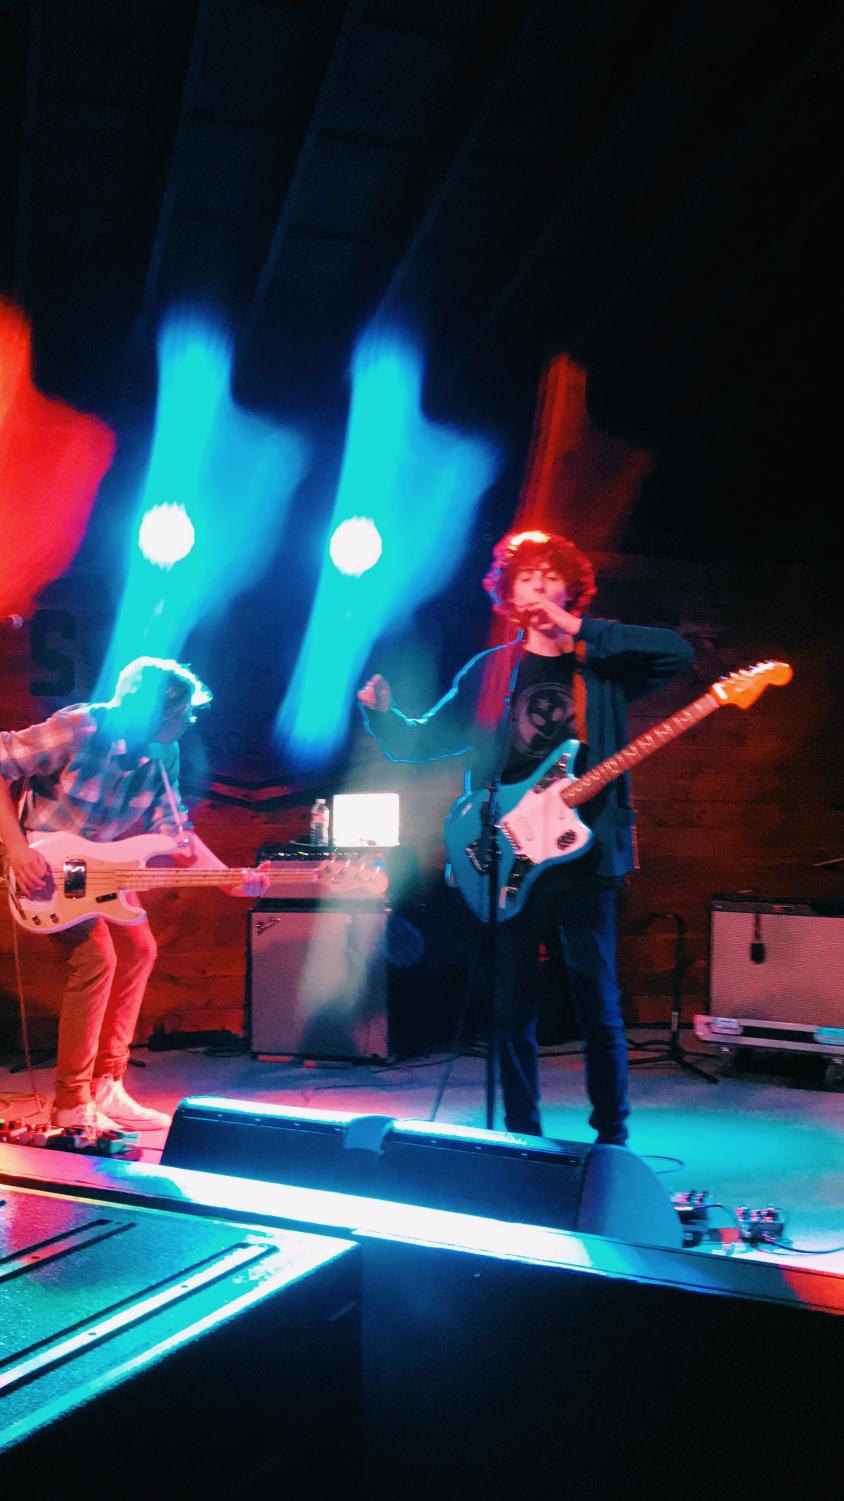 Calpurnia+Gives+Electrifying+Performance+in+Downtown+Austin